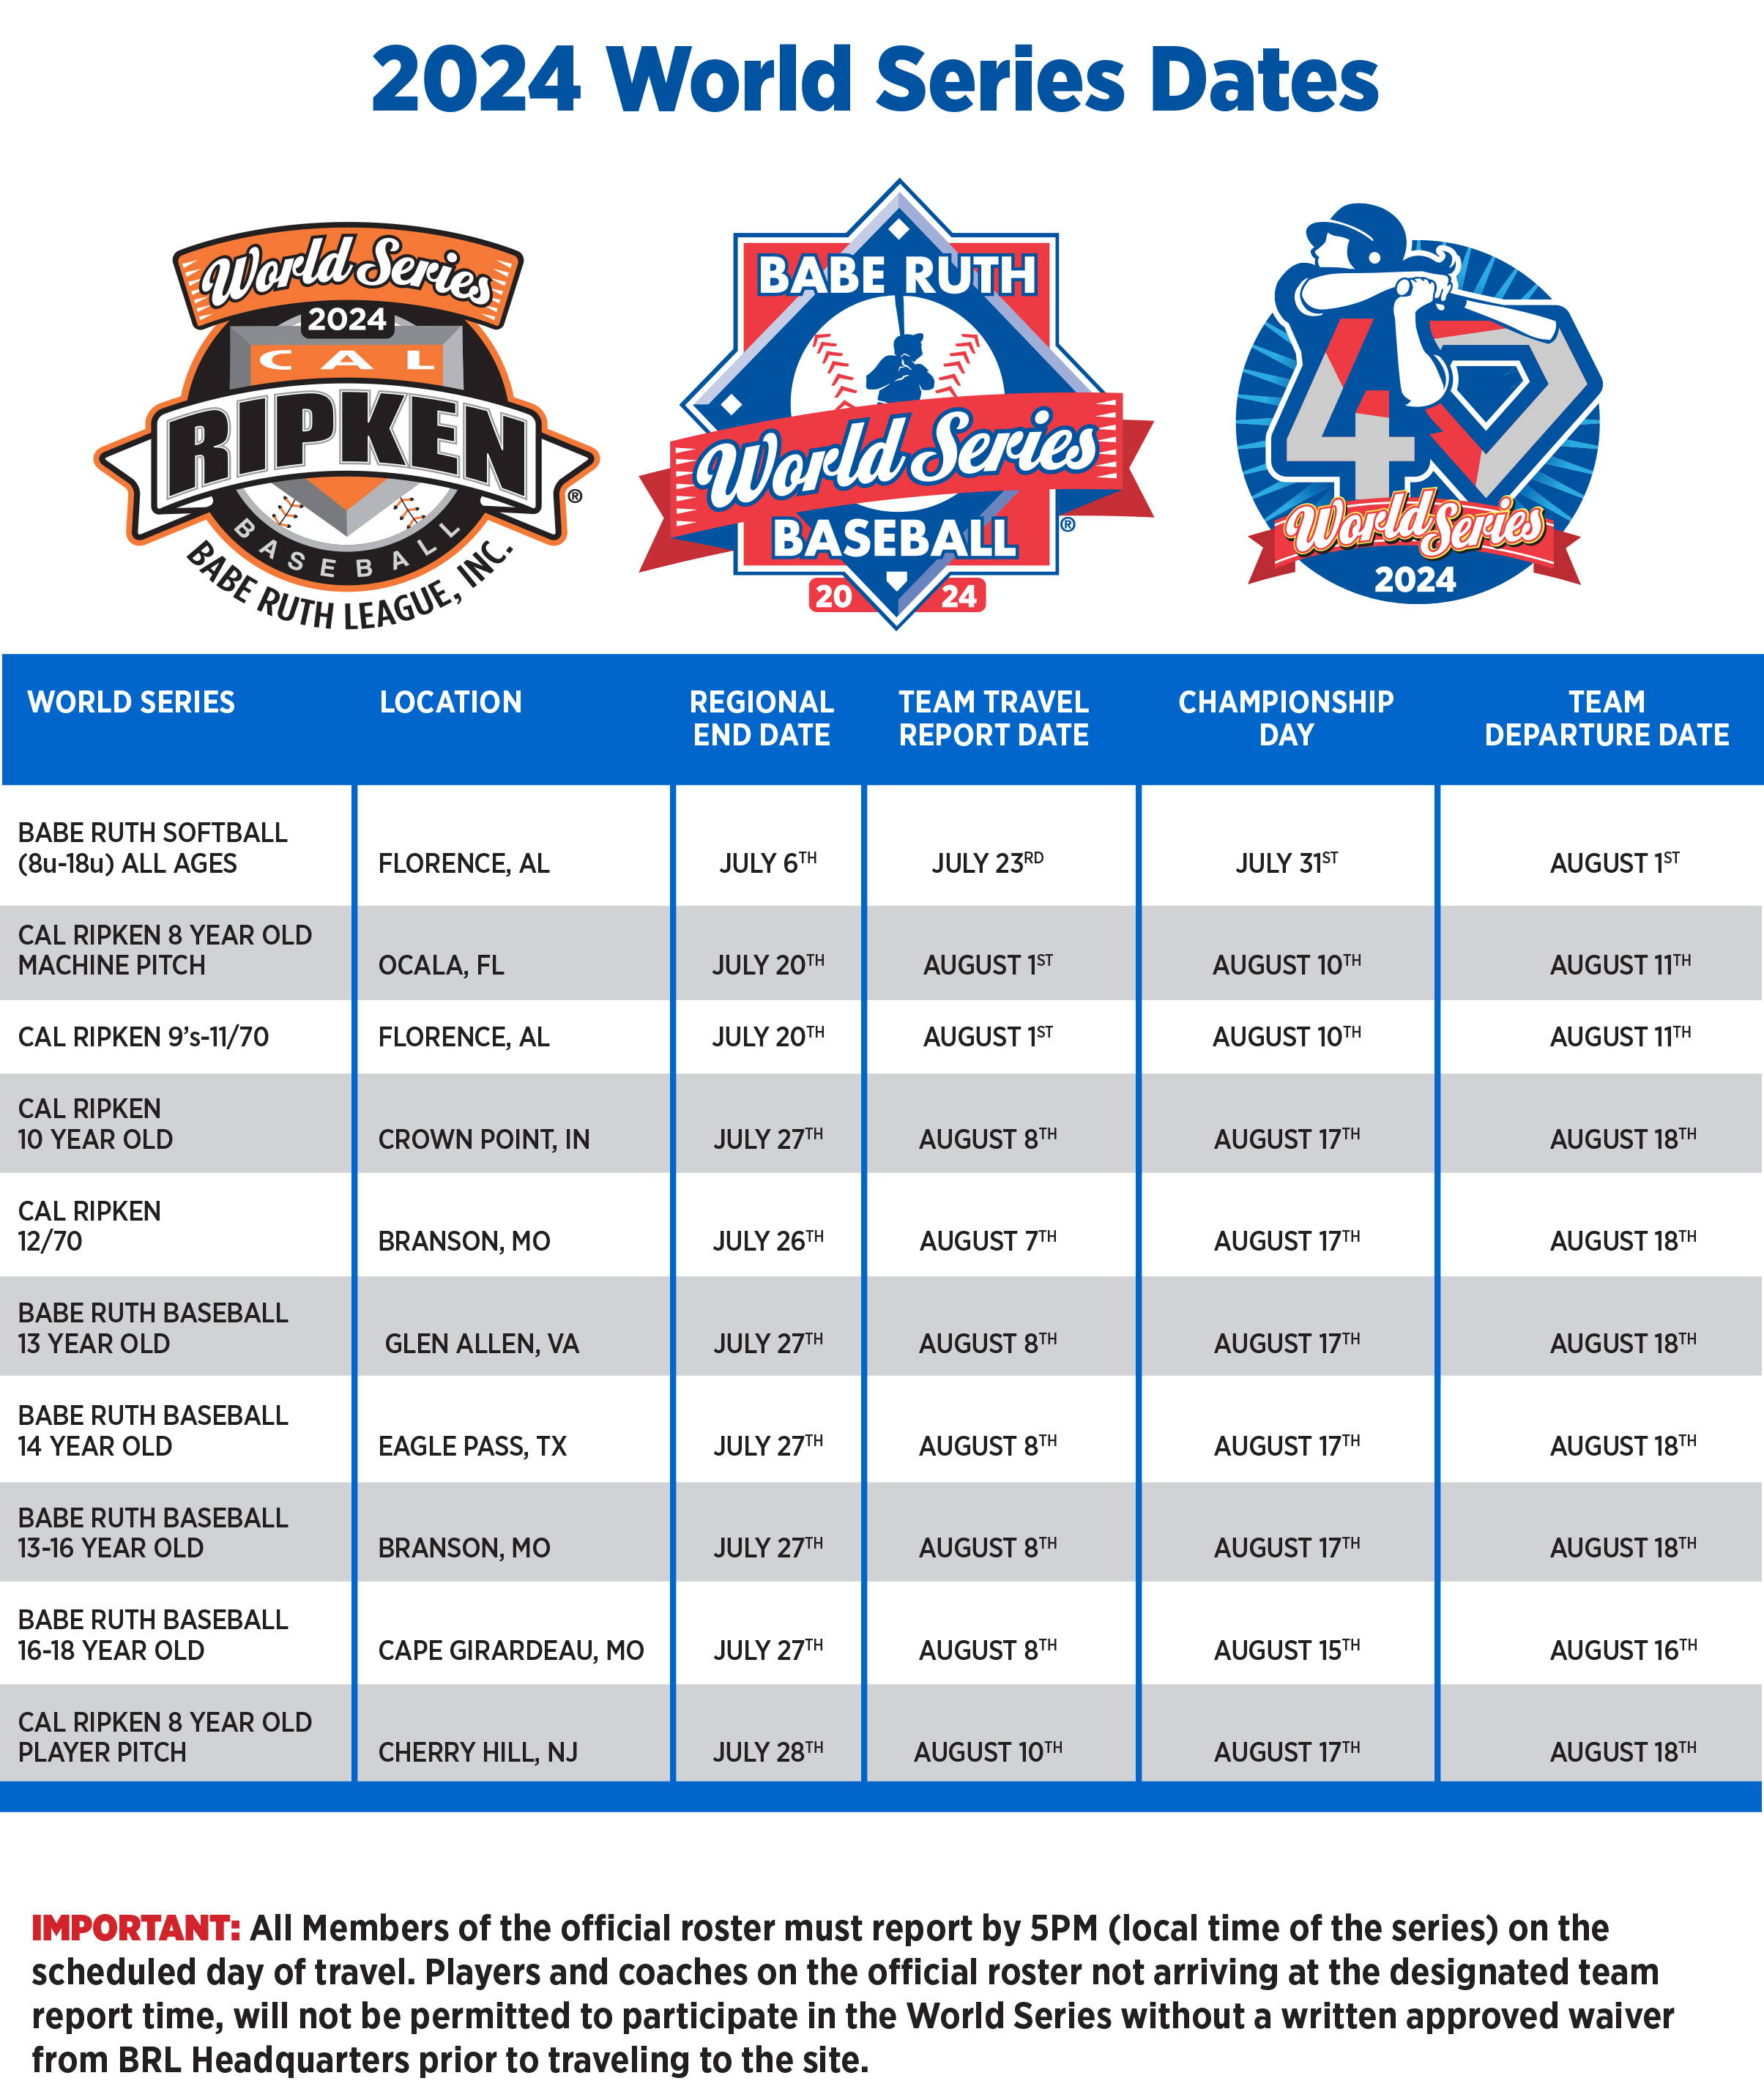 2024 World Series Dates and Locations: A Blend of Legacy and Excitement!